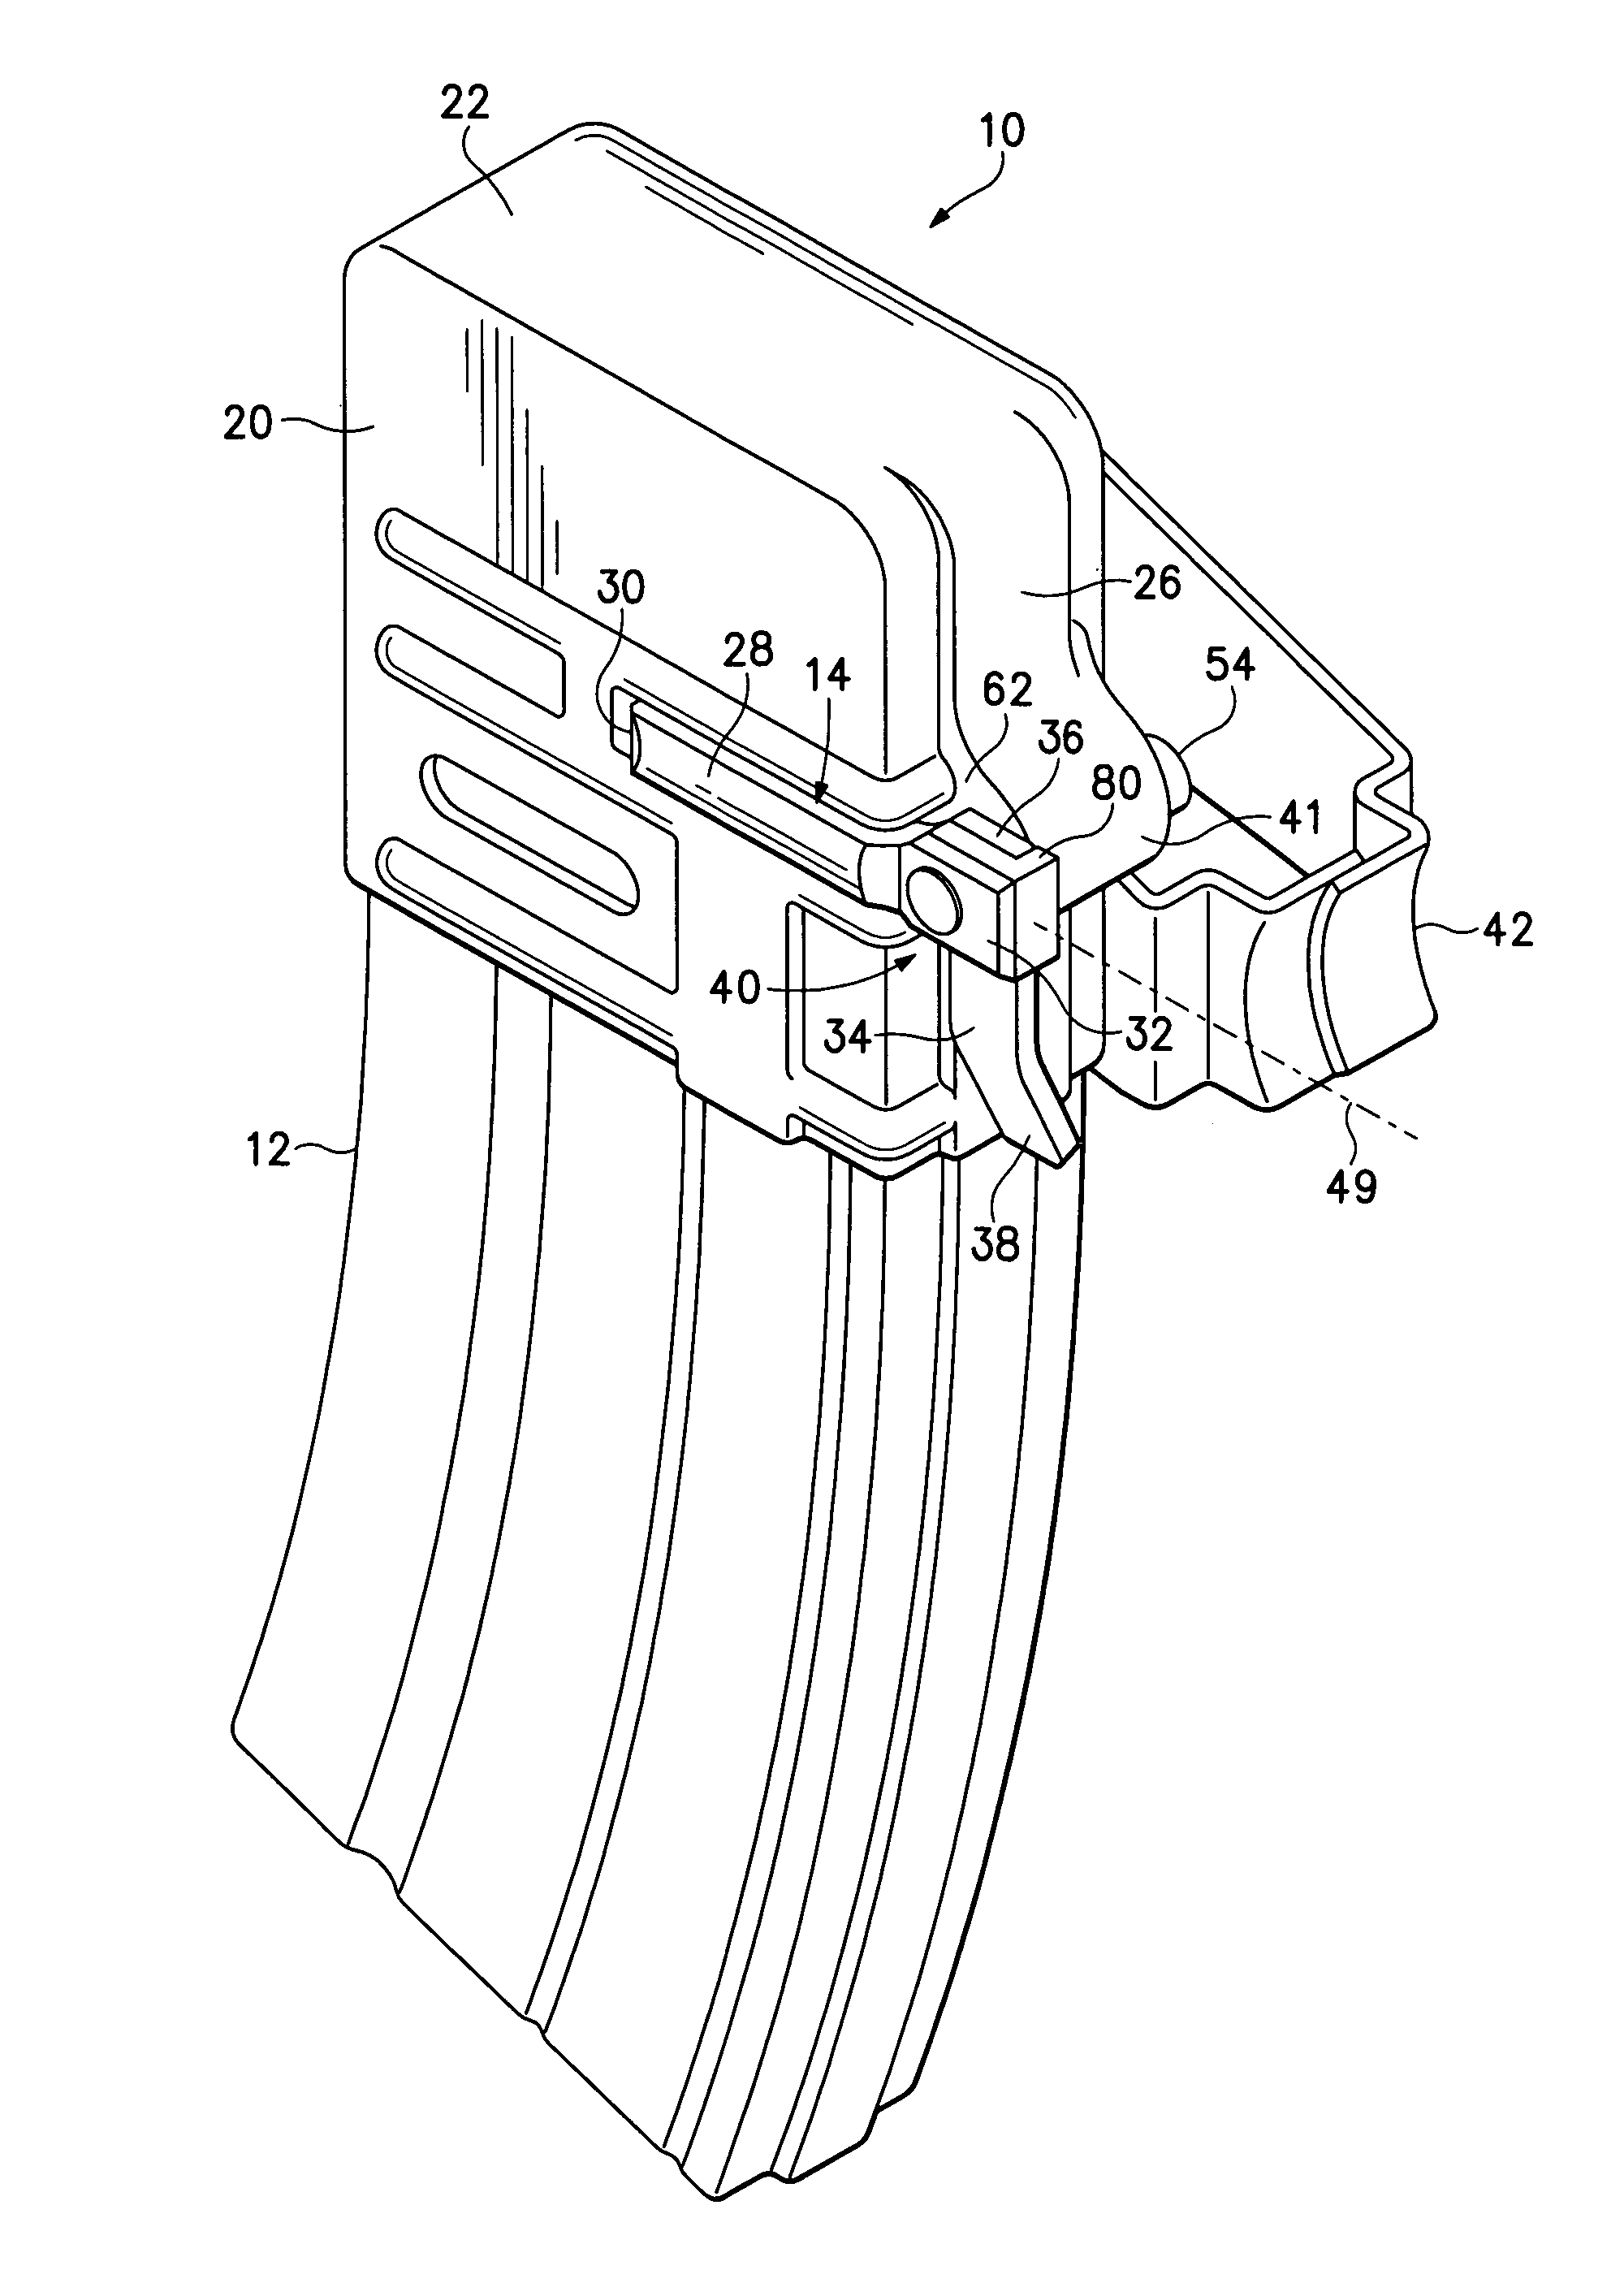 Spare magazine carrier with independent latch mechanism